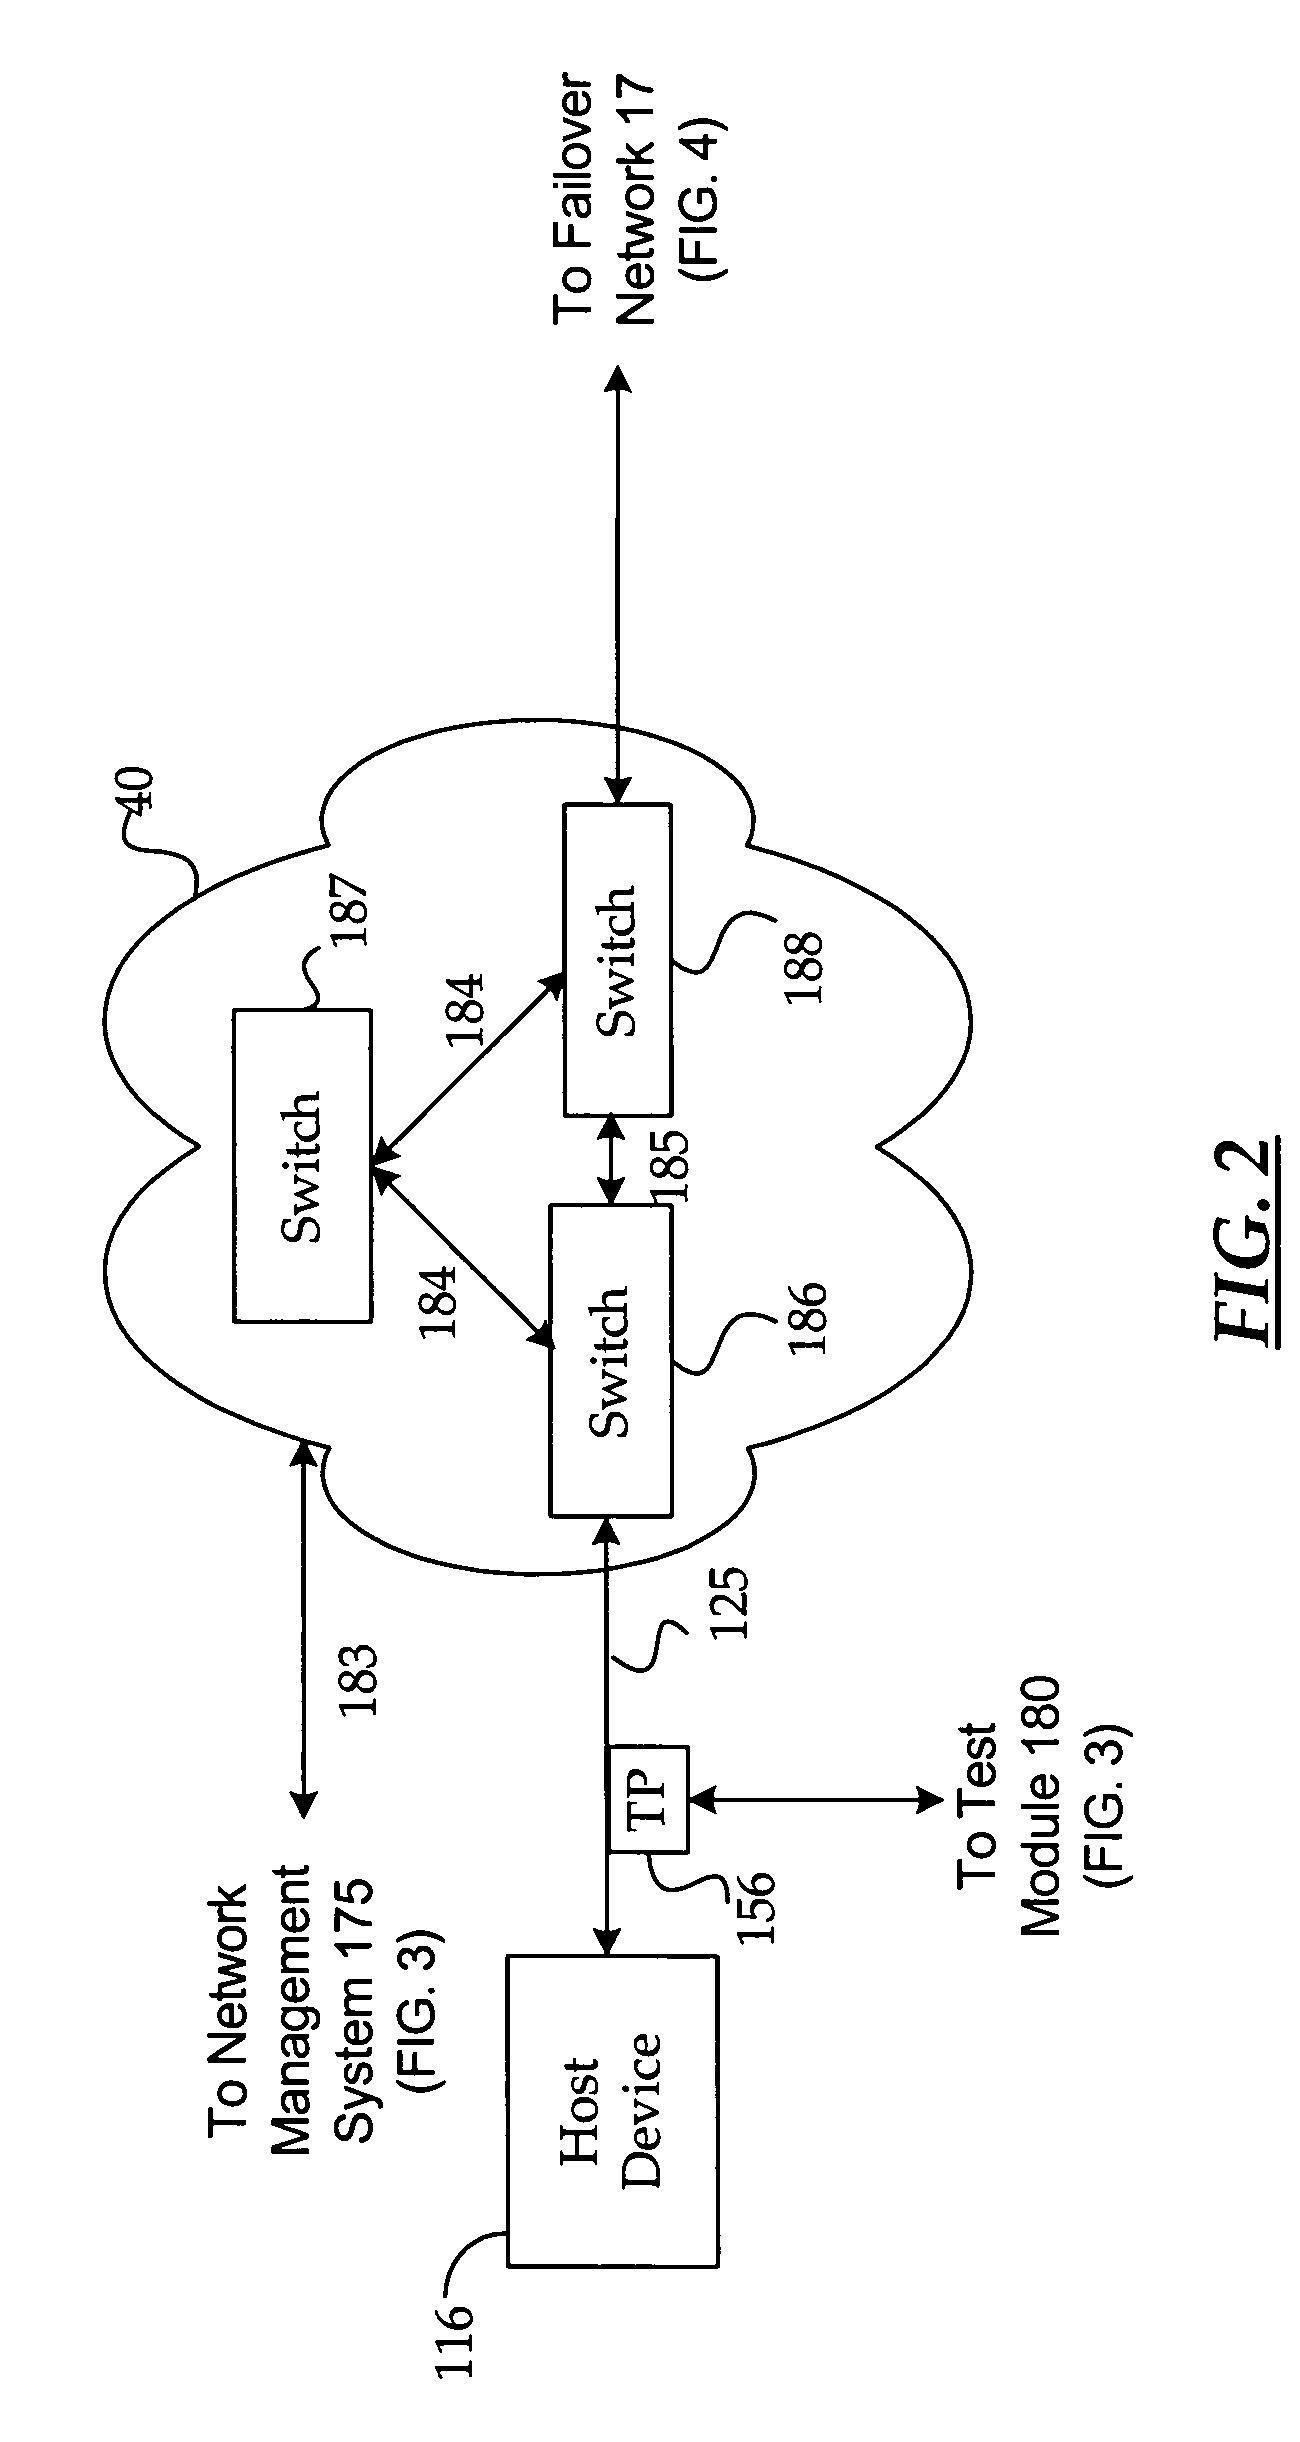 Method and system for on demand selective rerouting of logical circuit data in a data network